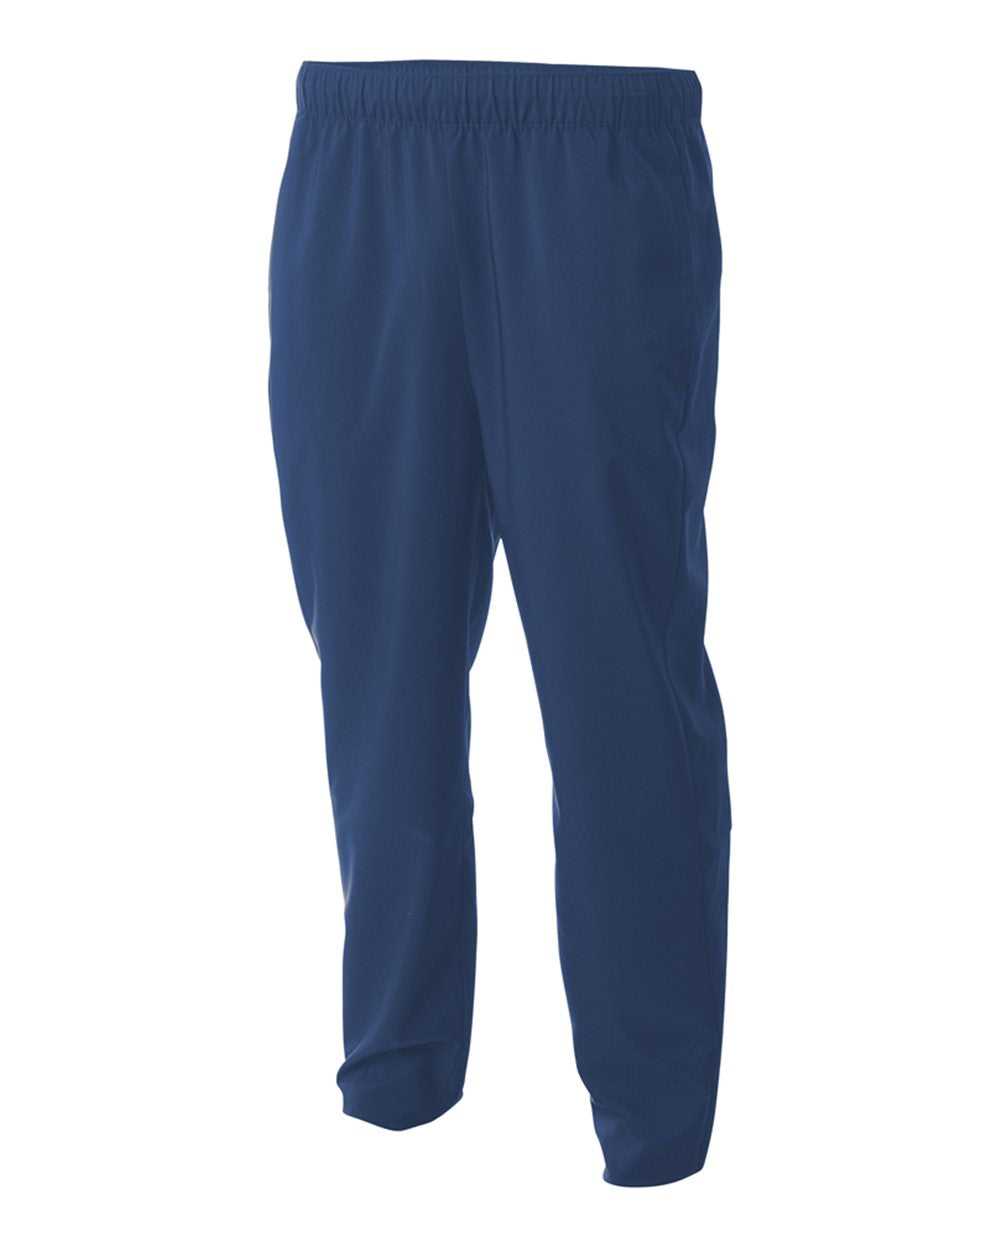 A4 N6014 The Element Training Pant - Navy - HIT a Double